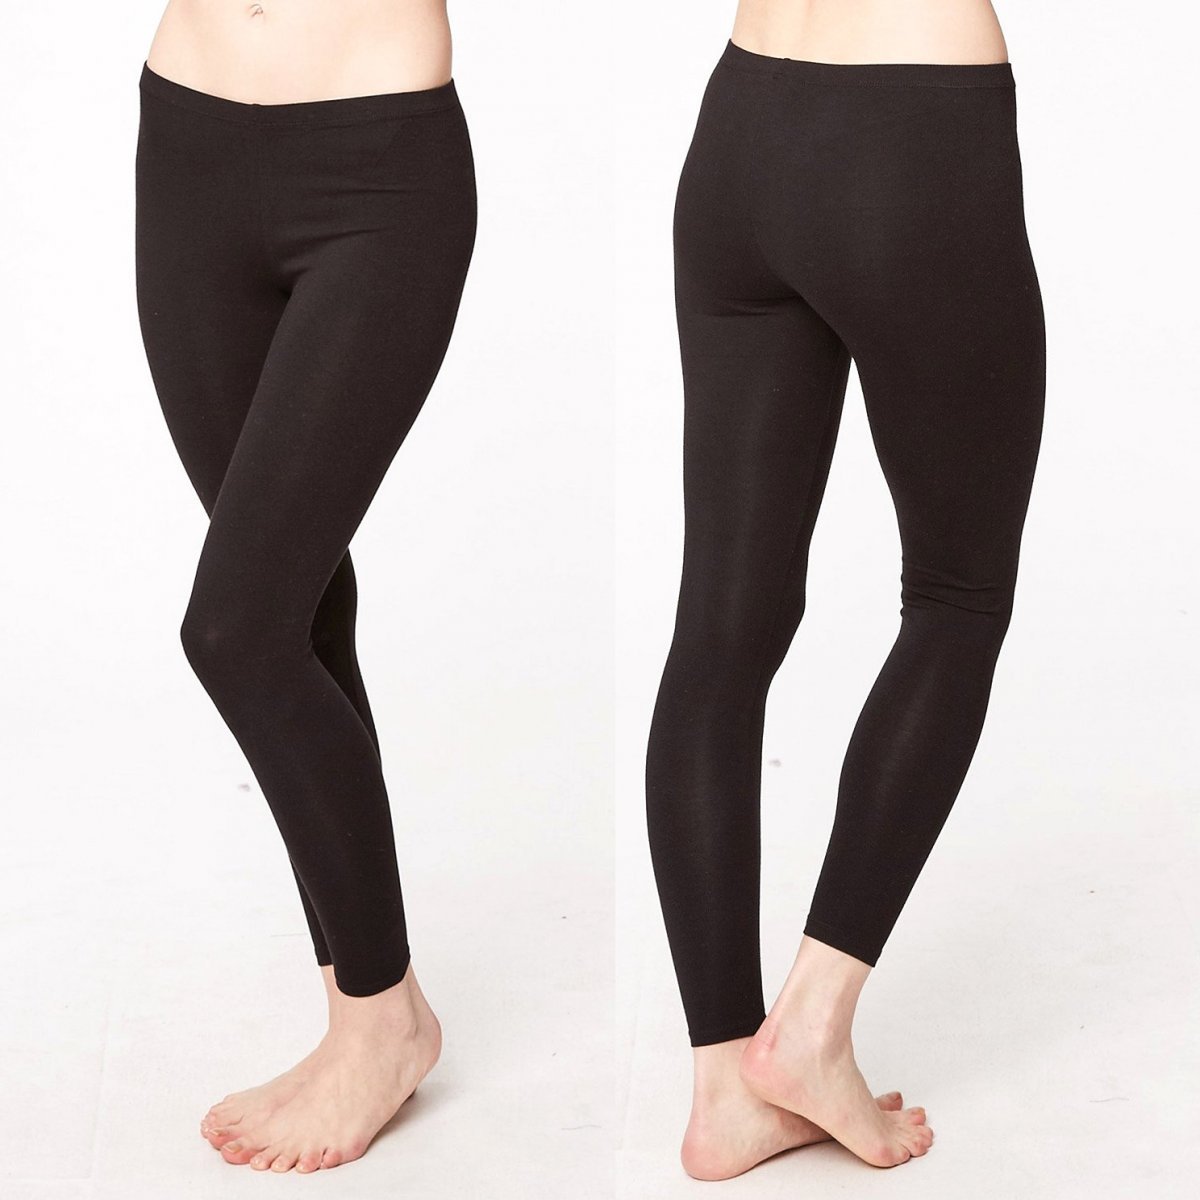 Bamboo leggings - Thought